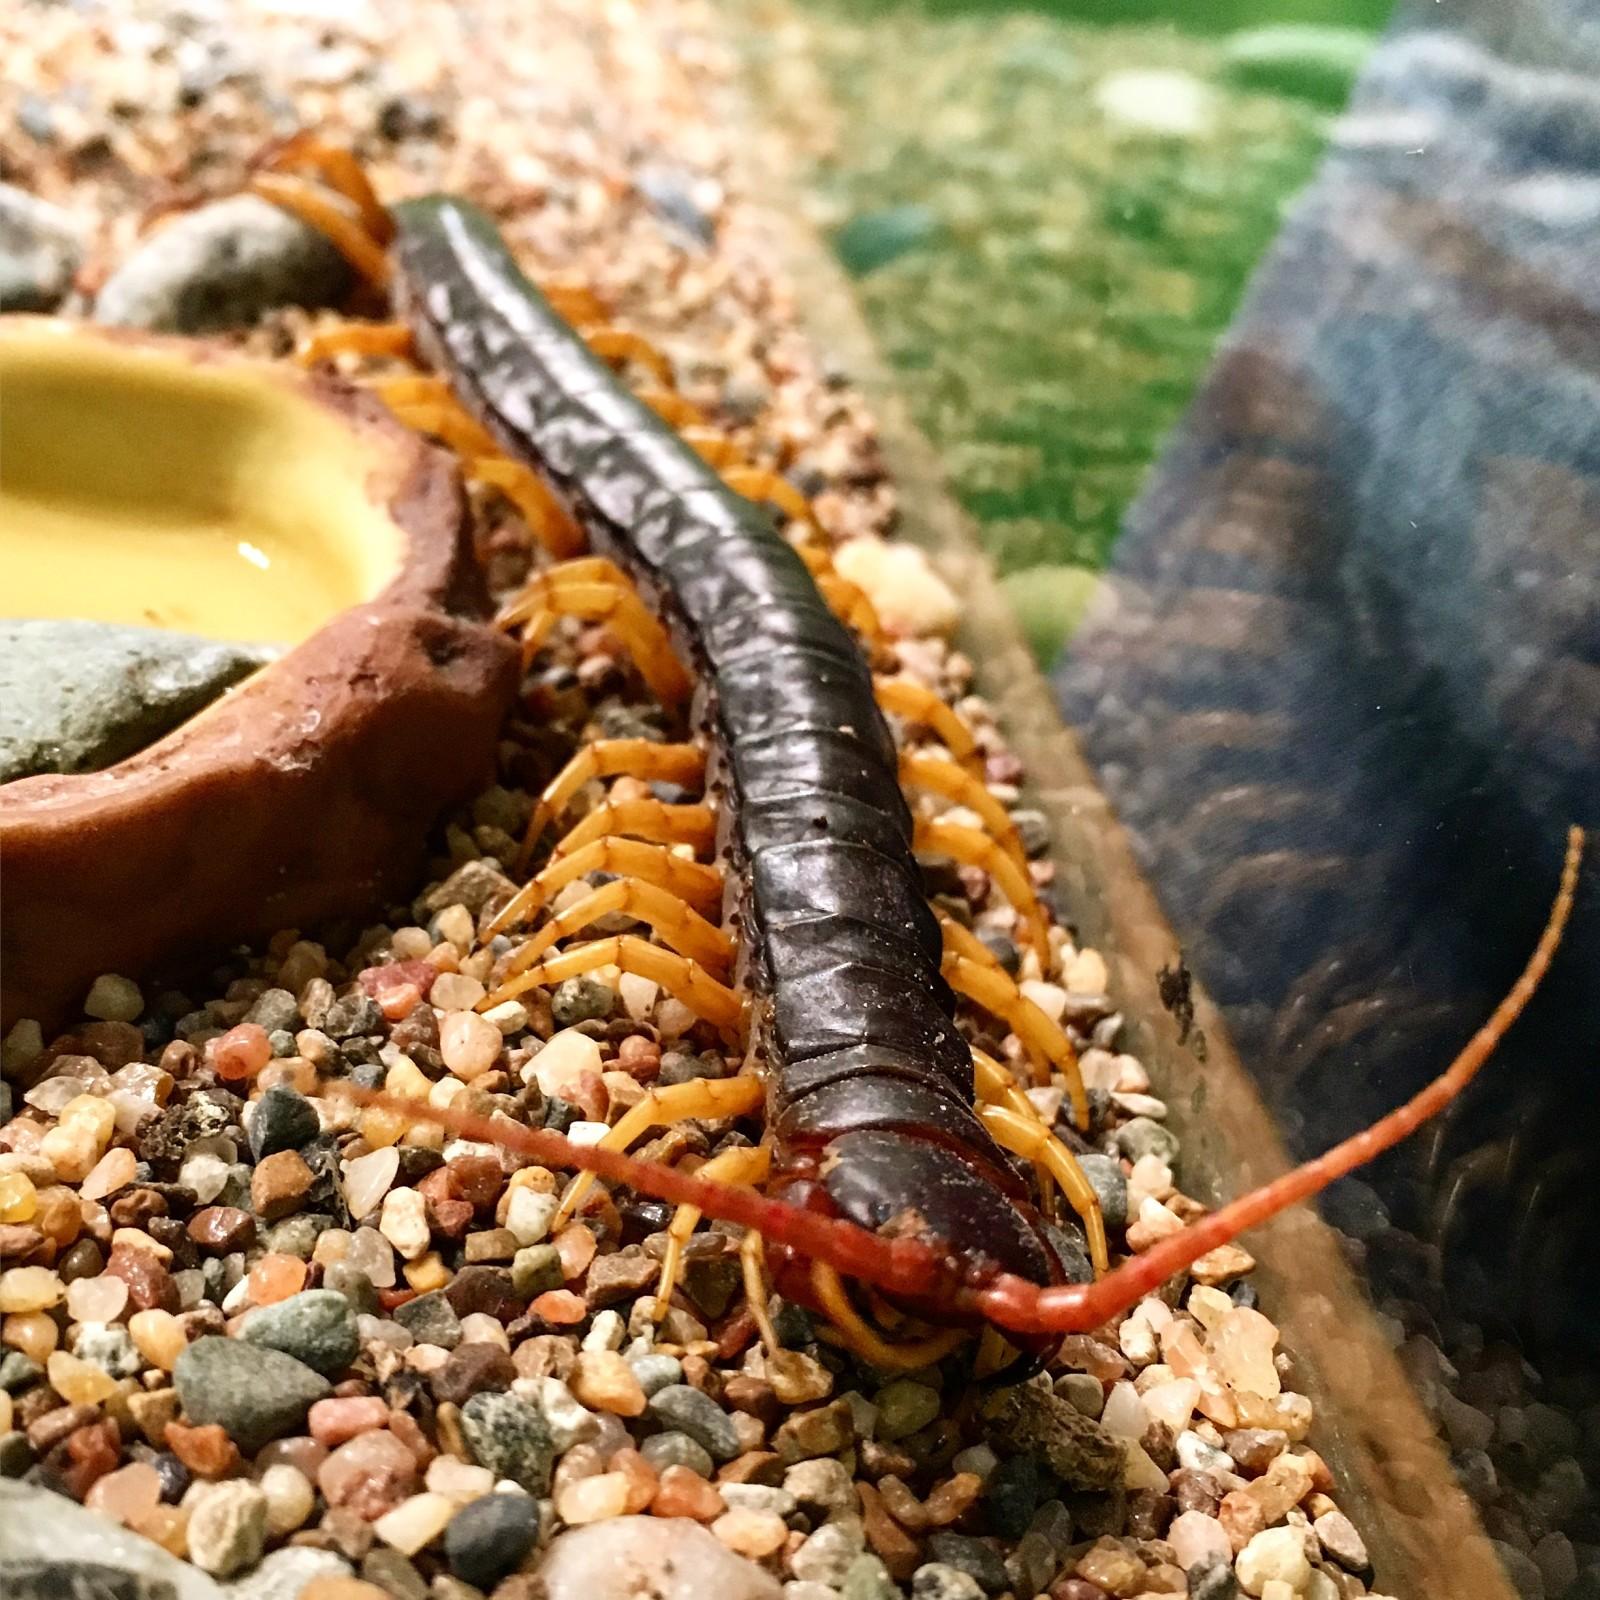 Jet is our quick and feisty Vietnamese centipede. Her antenna are incredibly sensitive at picking up different chemicals and vibrations, making her an effective predator.